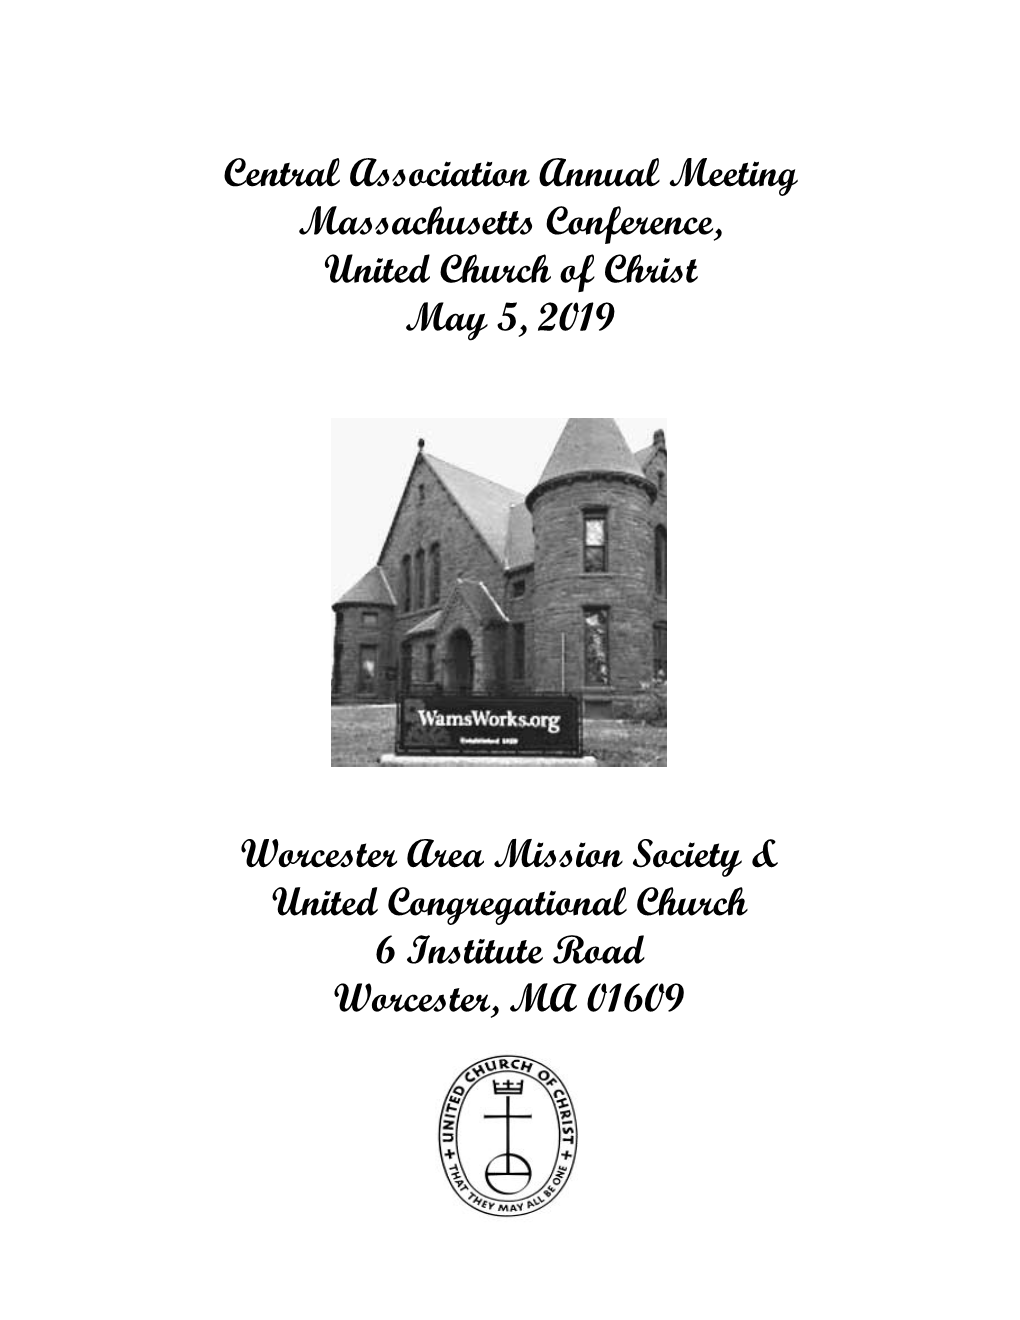 Central Association Annual Meeting Massachusetts Conference, United Church of Christ May 5, 2019